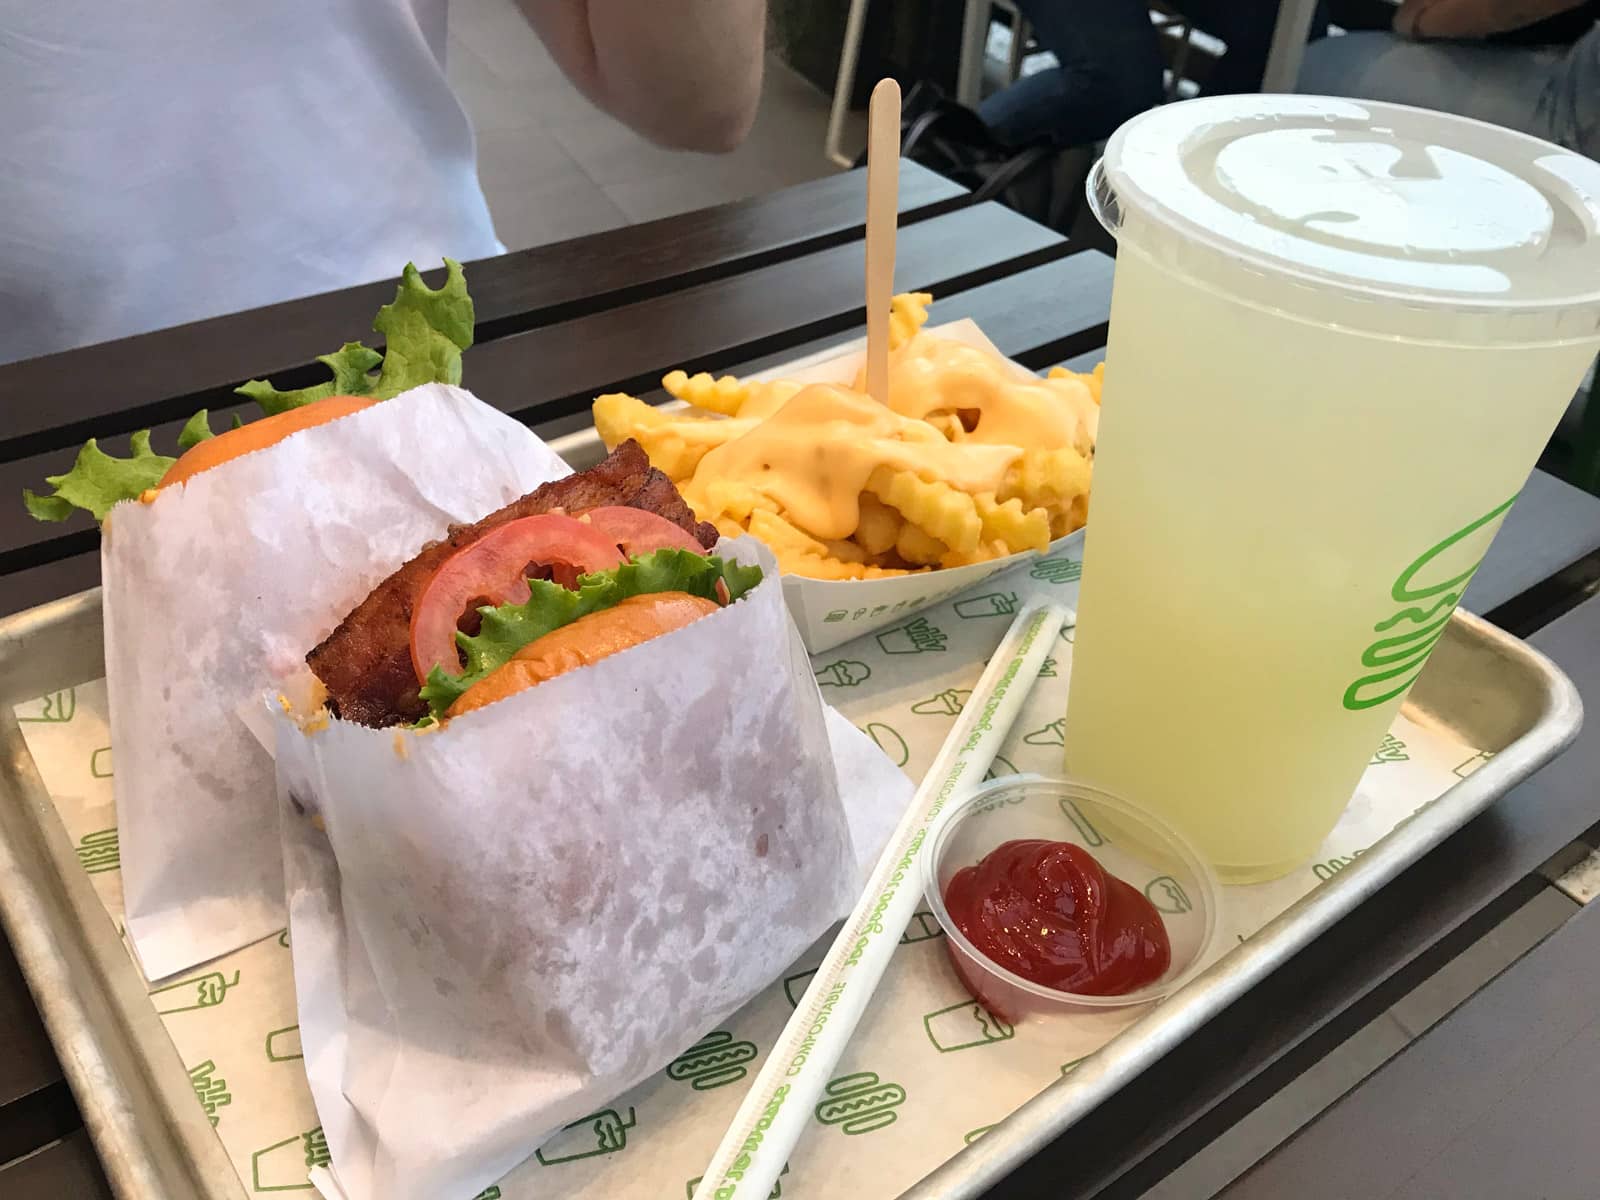 A silver tray served with two burgers which can be seen to be filled with bacon, tomato and lettuce. Also on the tray is a small box of crinkle cut fries, a plastic cup of lemonade, and a small saucer of tomato sauce